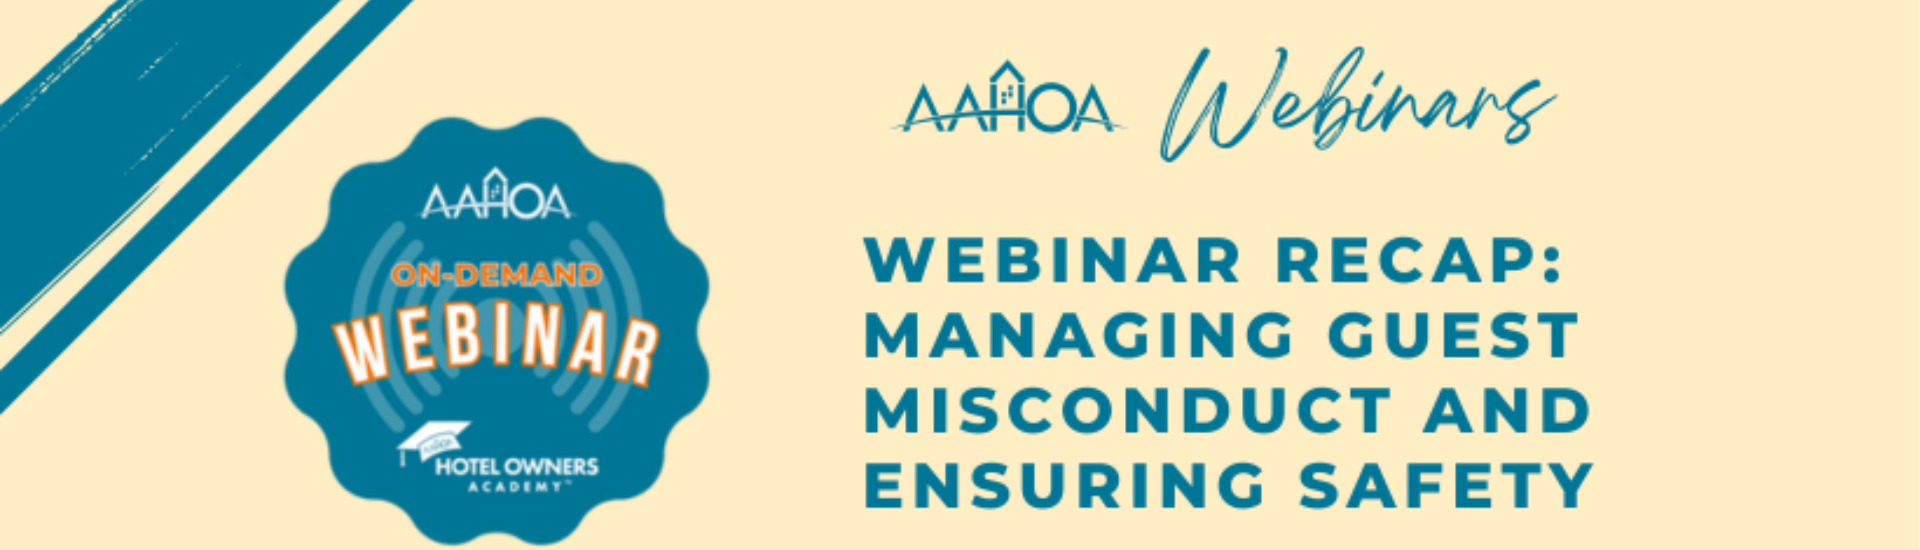 Empowering Hoteliers: Webinar Recap on Managing Guest Misconduct and Ensuring Safety